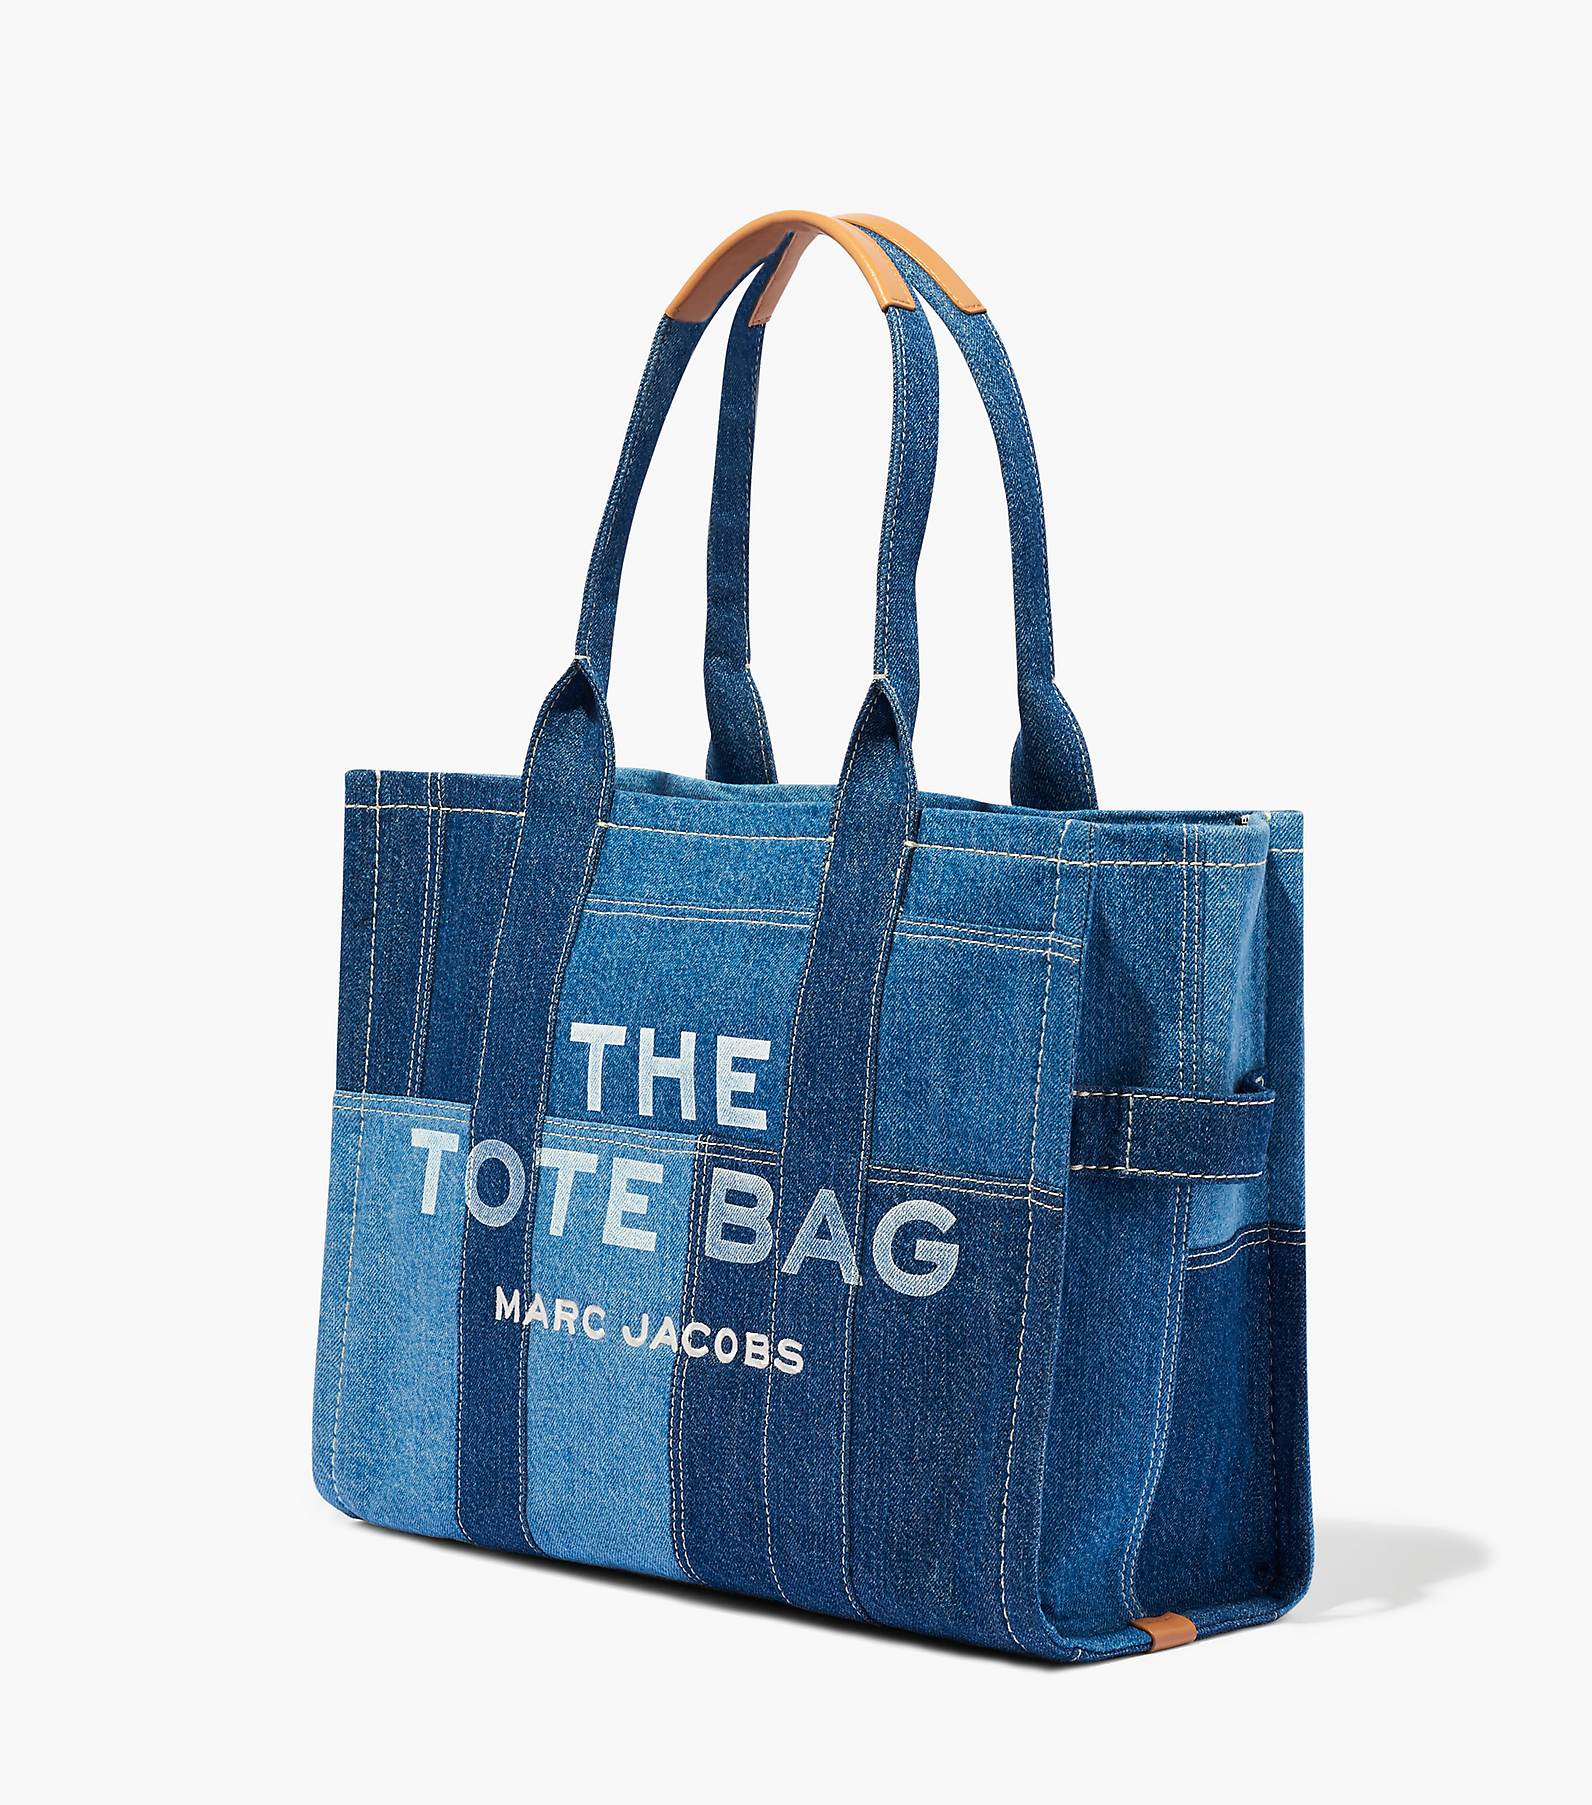 THEOVEMARC JACOBS ☆ THE OVERSIZED TAG TOTE